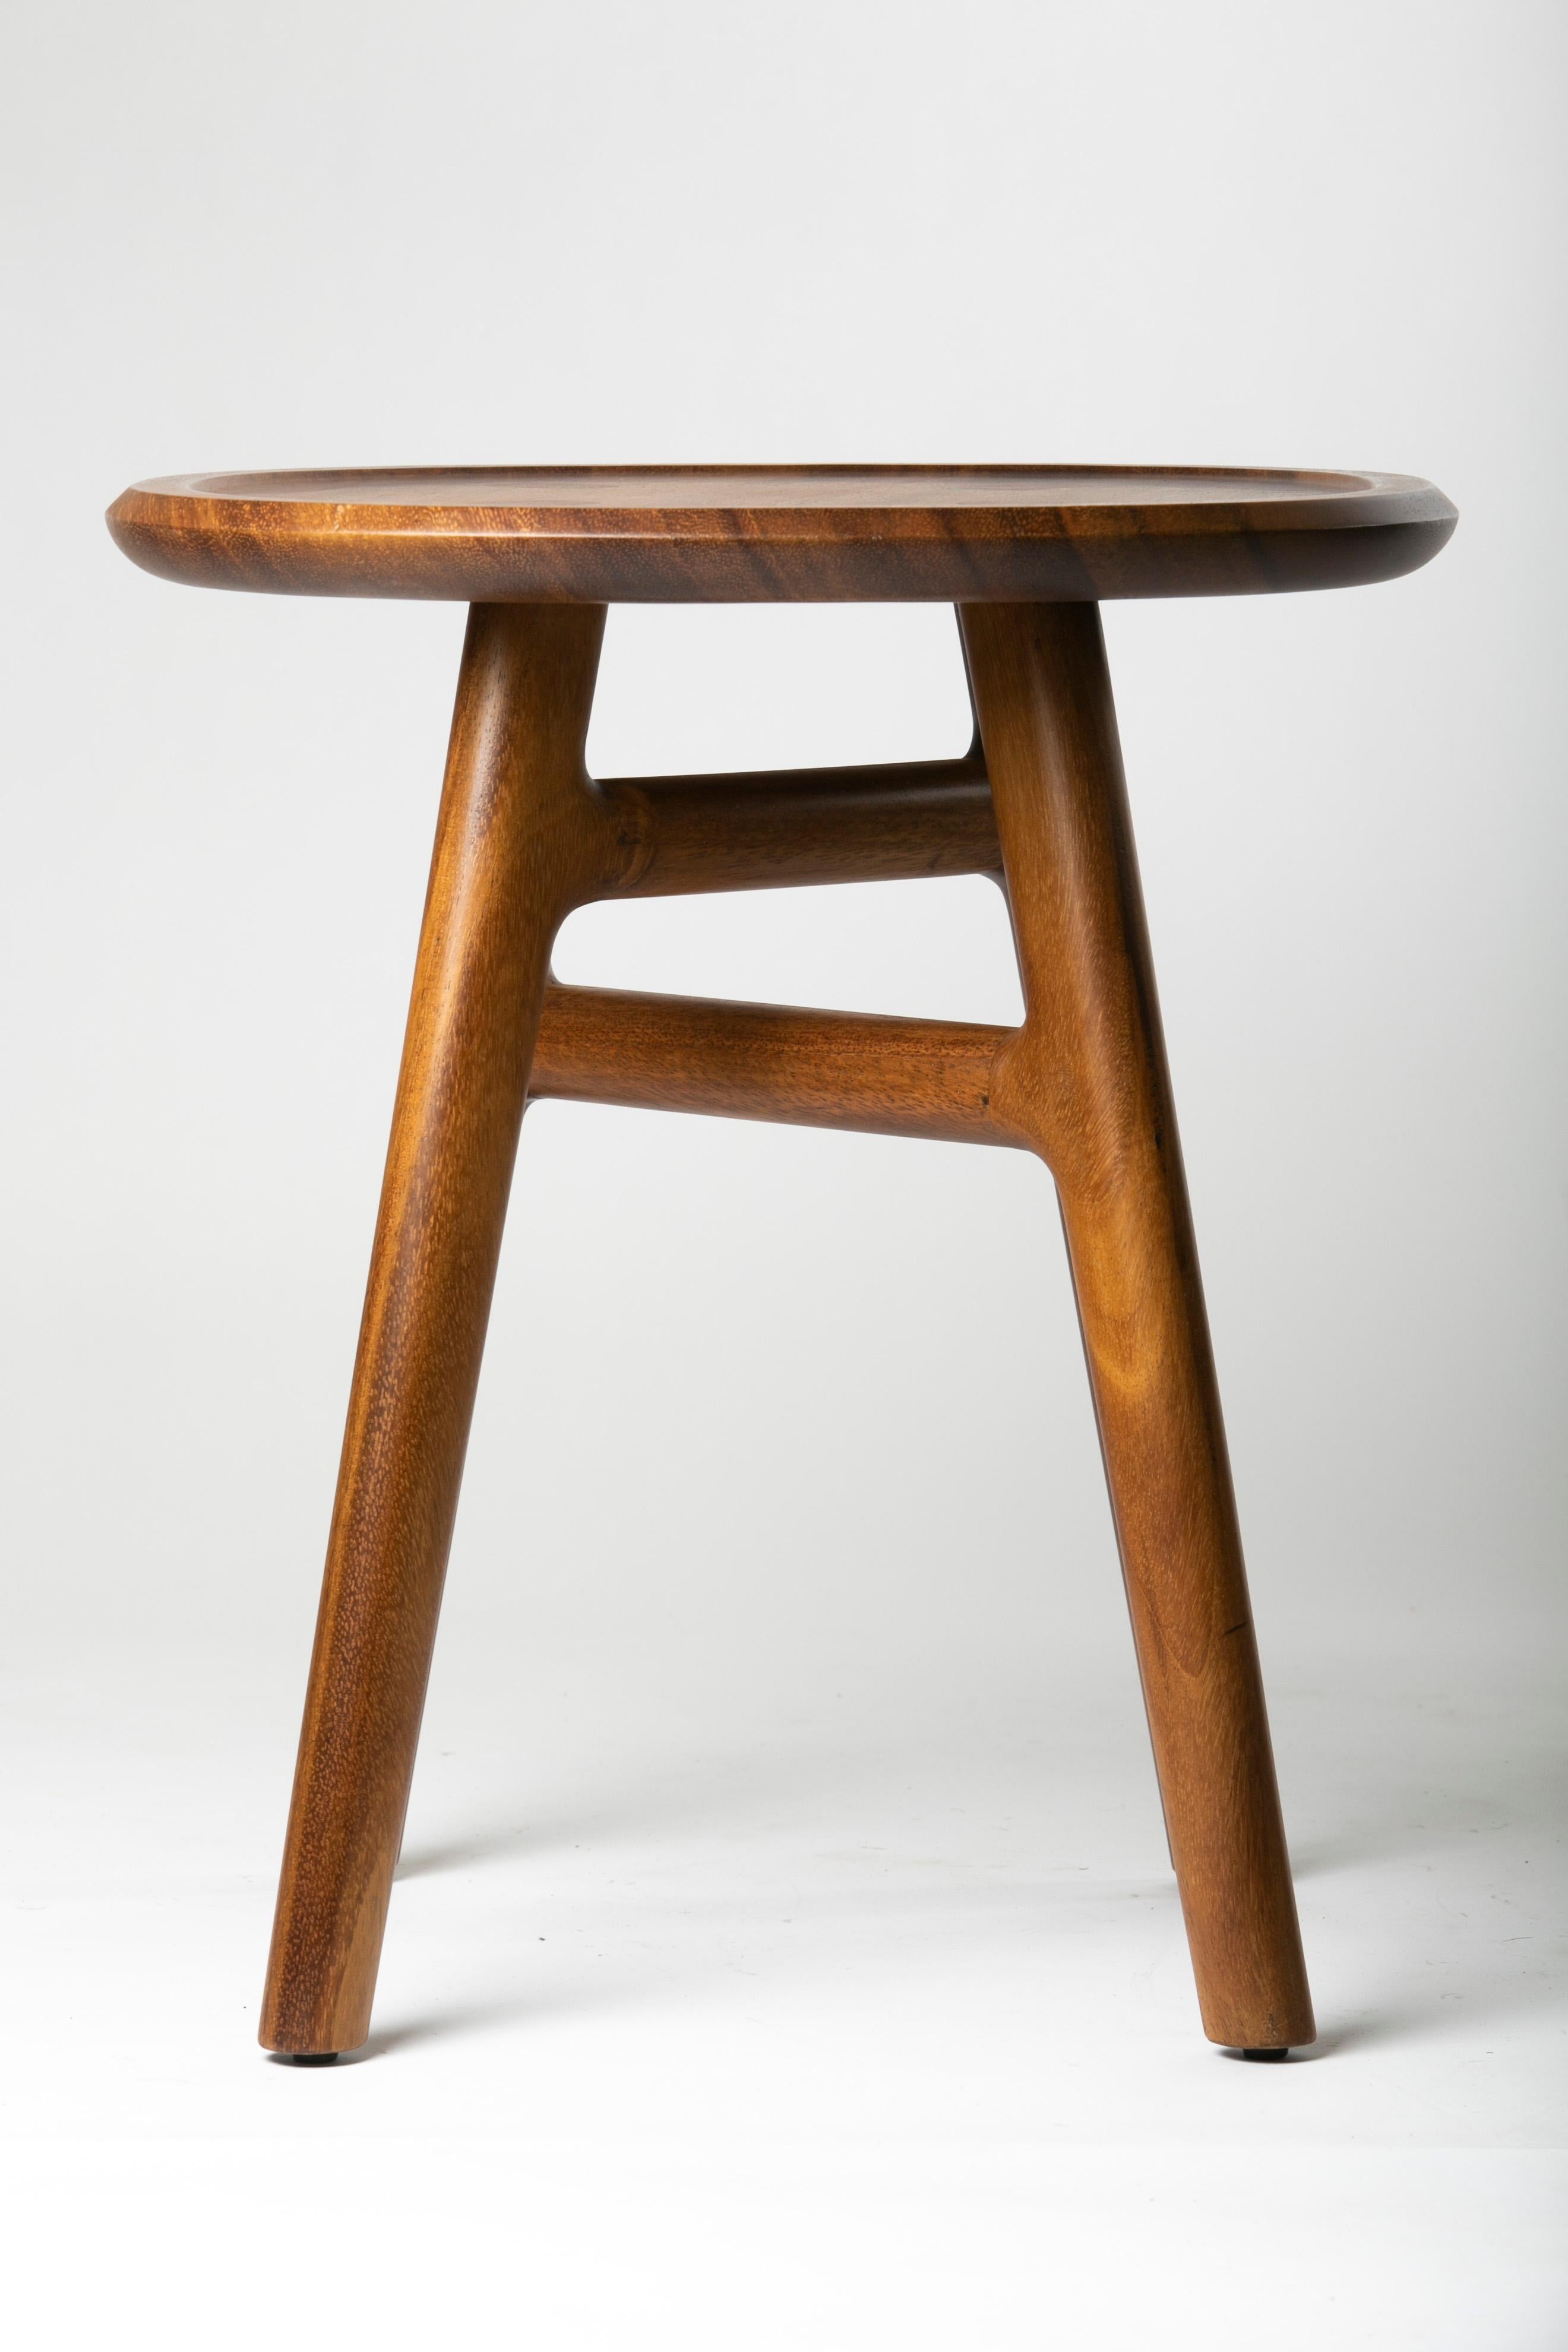 Mexican Desierto Sidetable 50, Tropical Hardwood, Design by Juskani Alonso For Sale